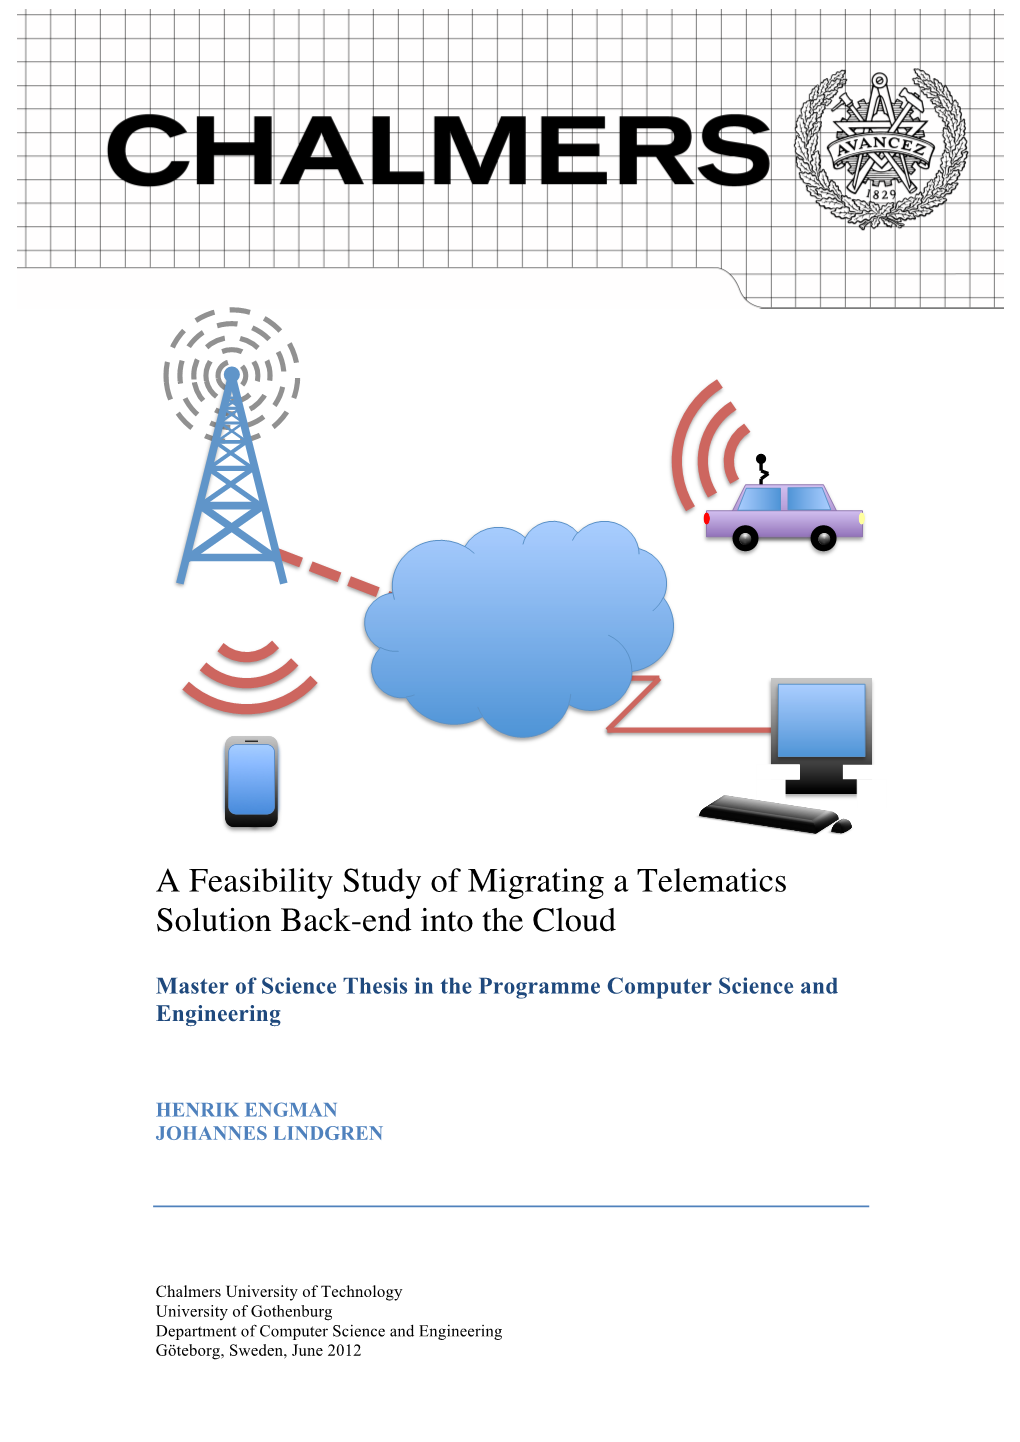 A Feasibility Study of Migrating a Telematics Solution Back-End Into the Cloud